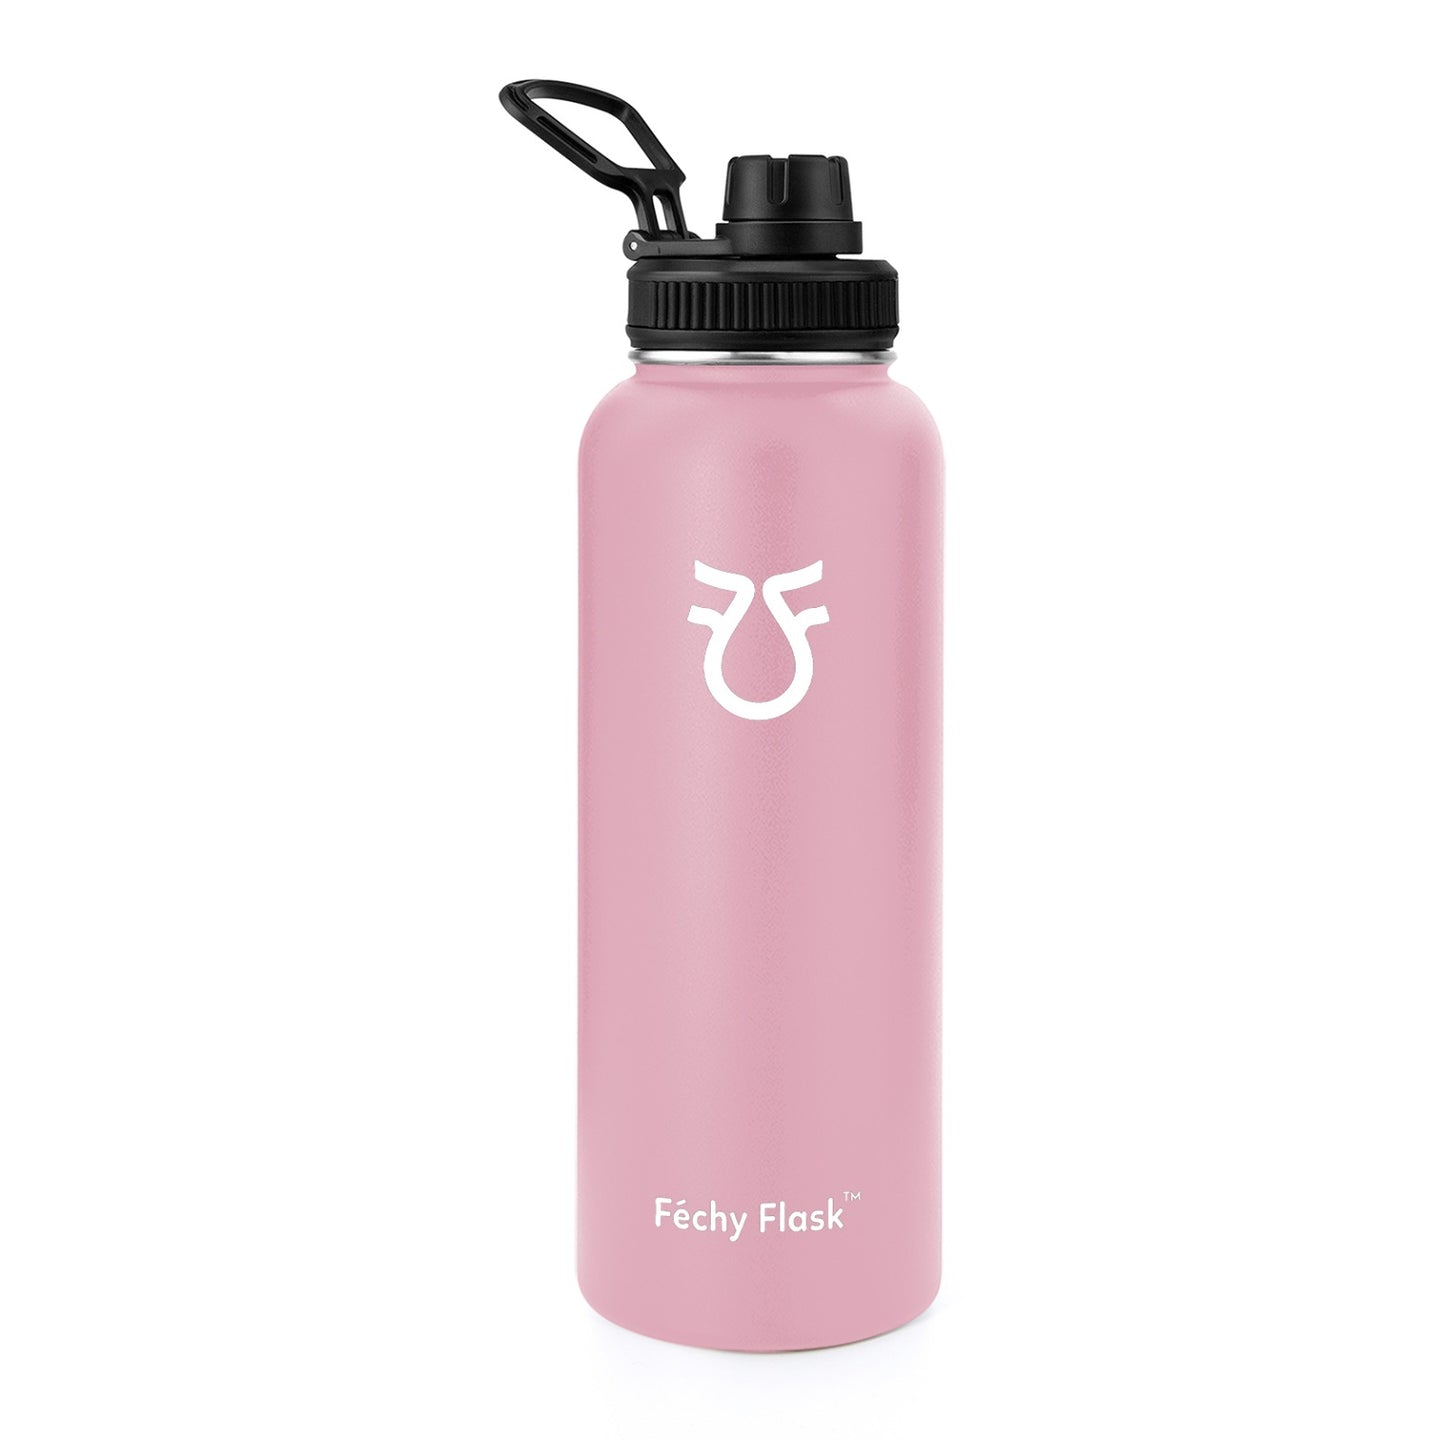 Fechy Stainless Steel insulated Drink Bottle - 1.15L - Pastel